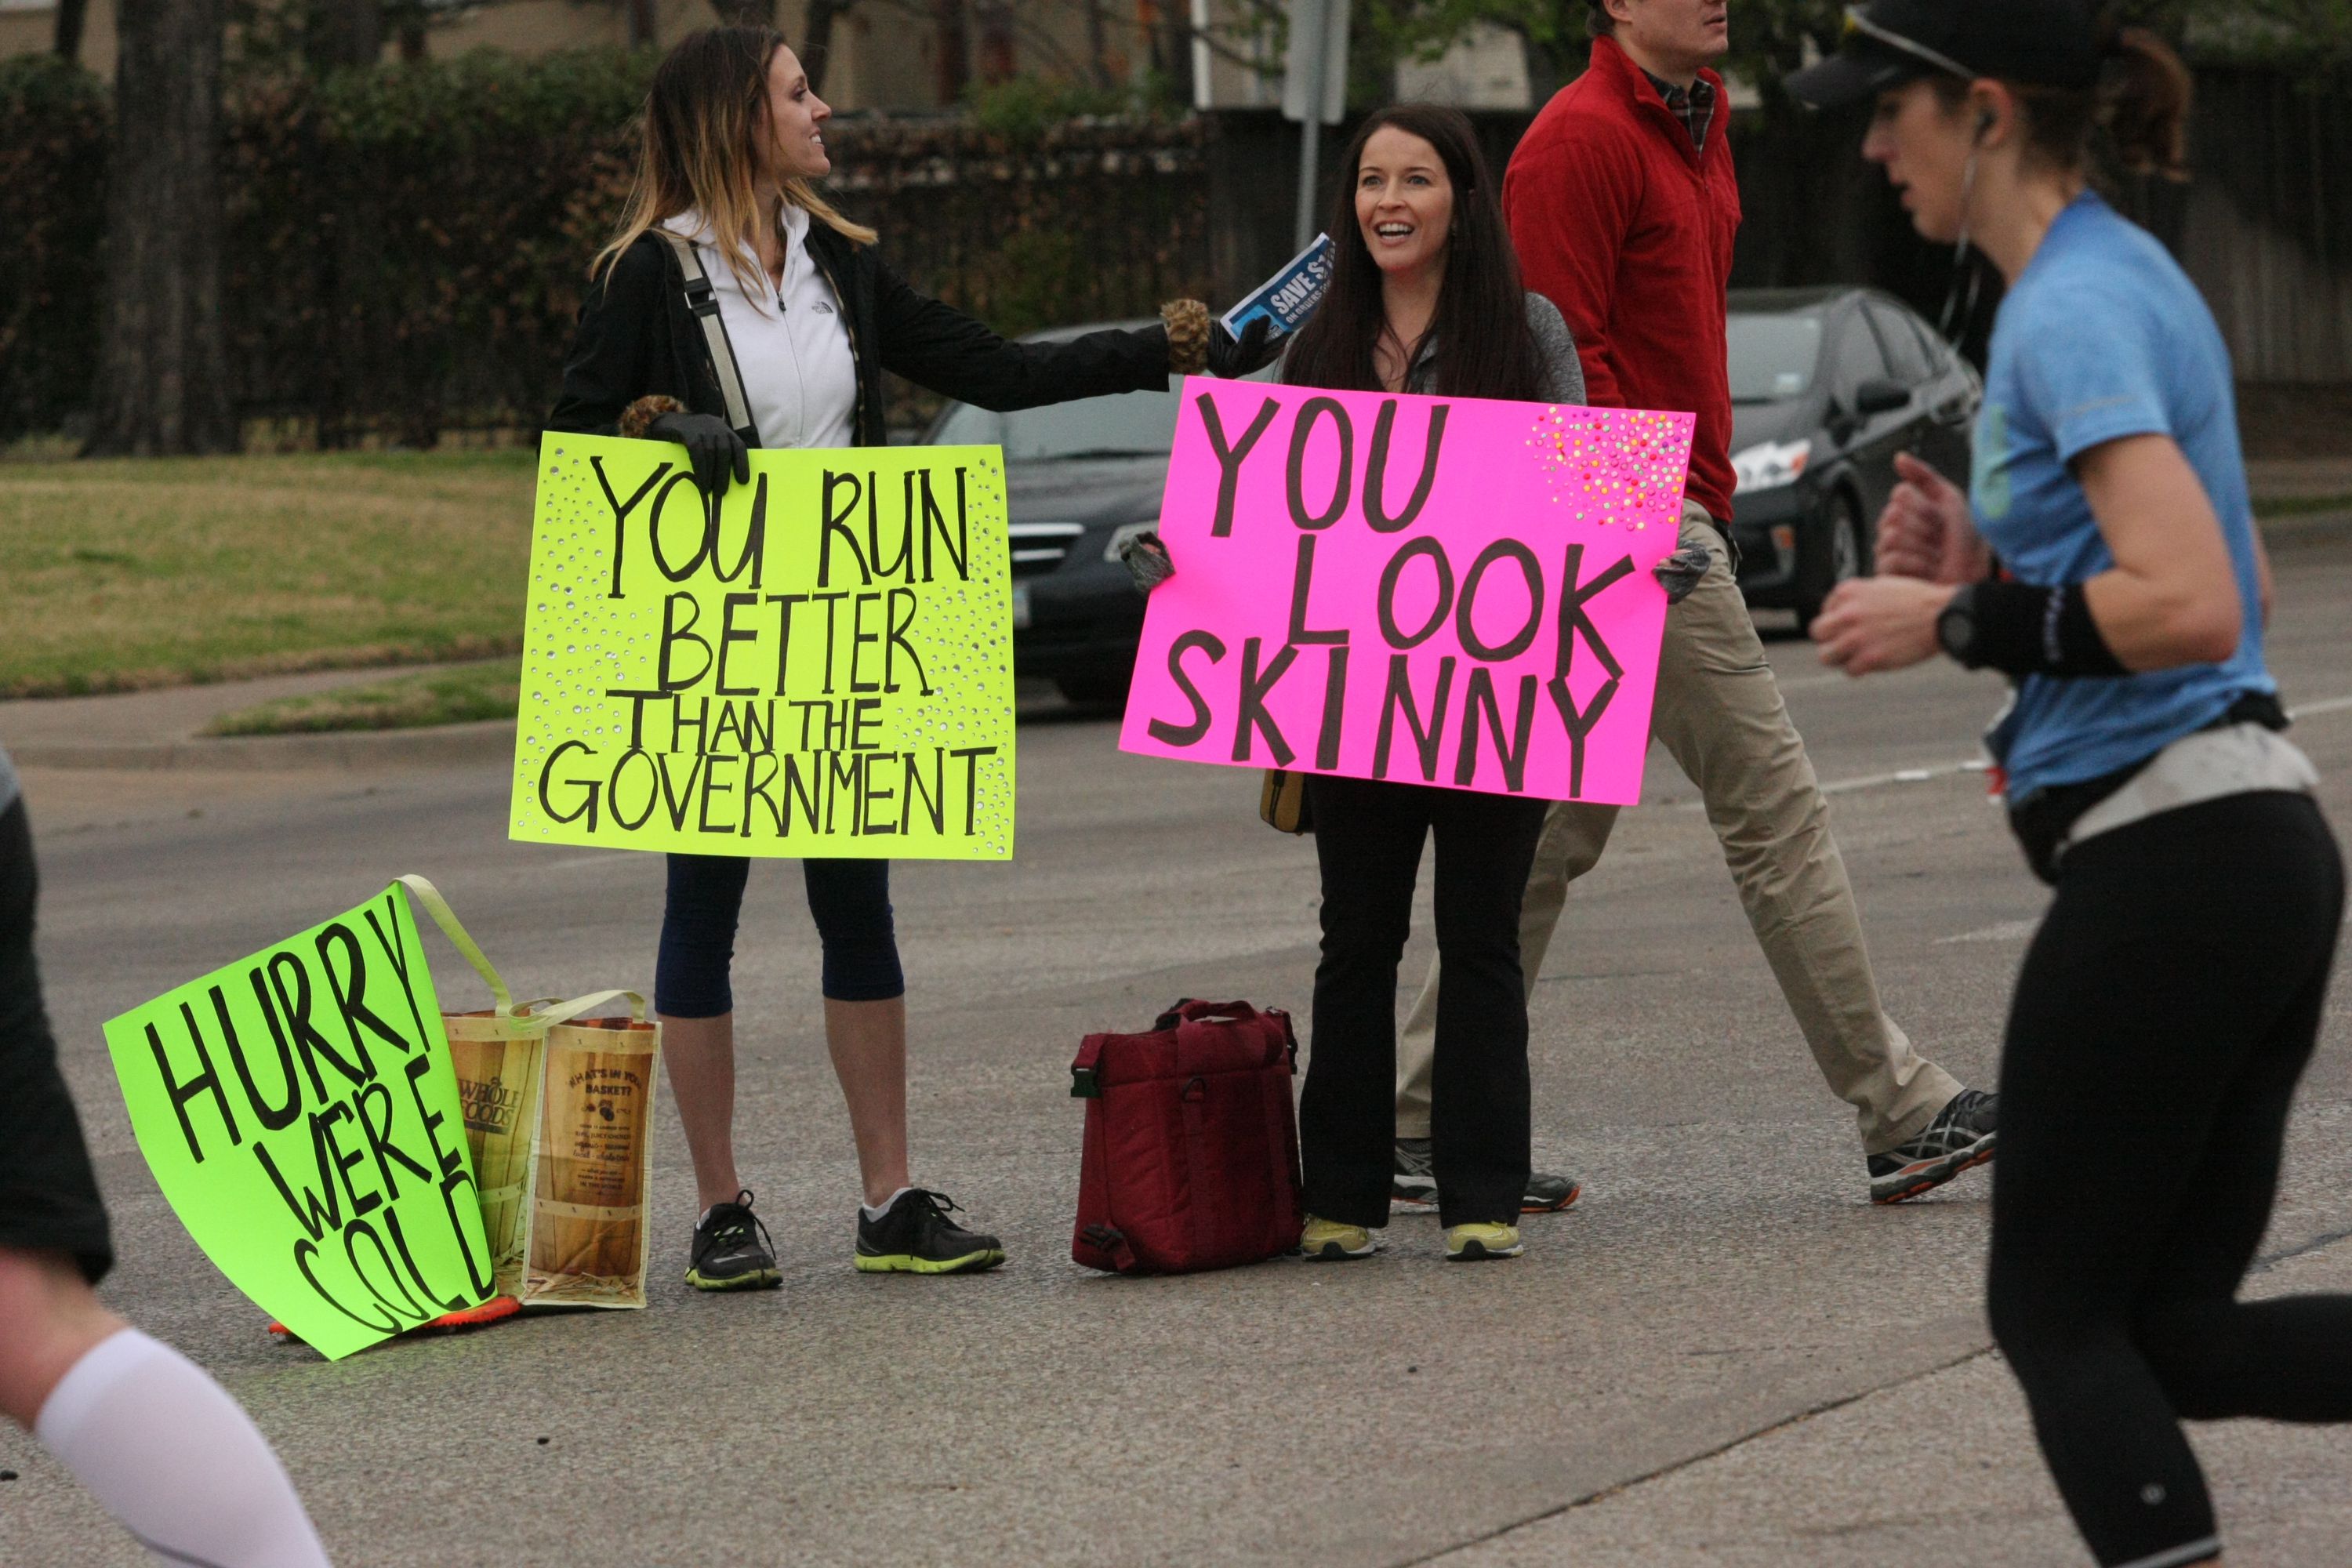 Quotes for Funny Signs for Marathon Sidelines